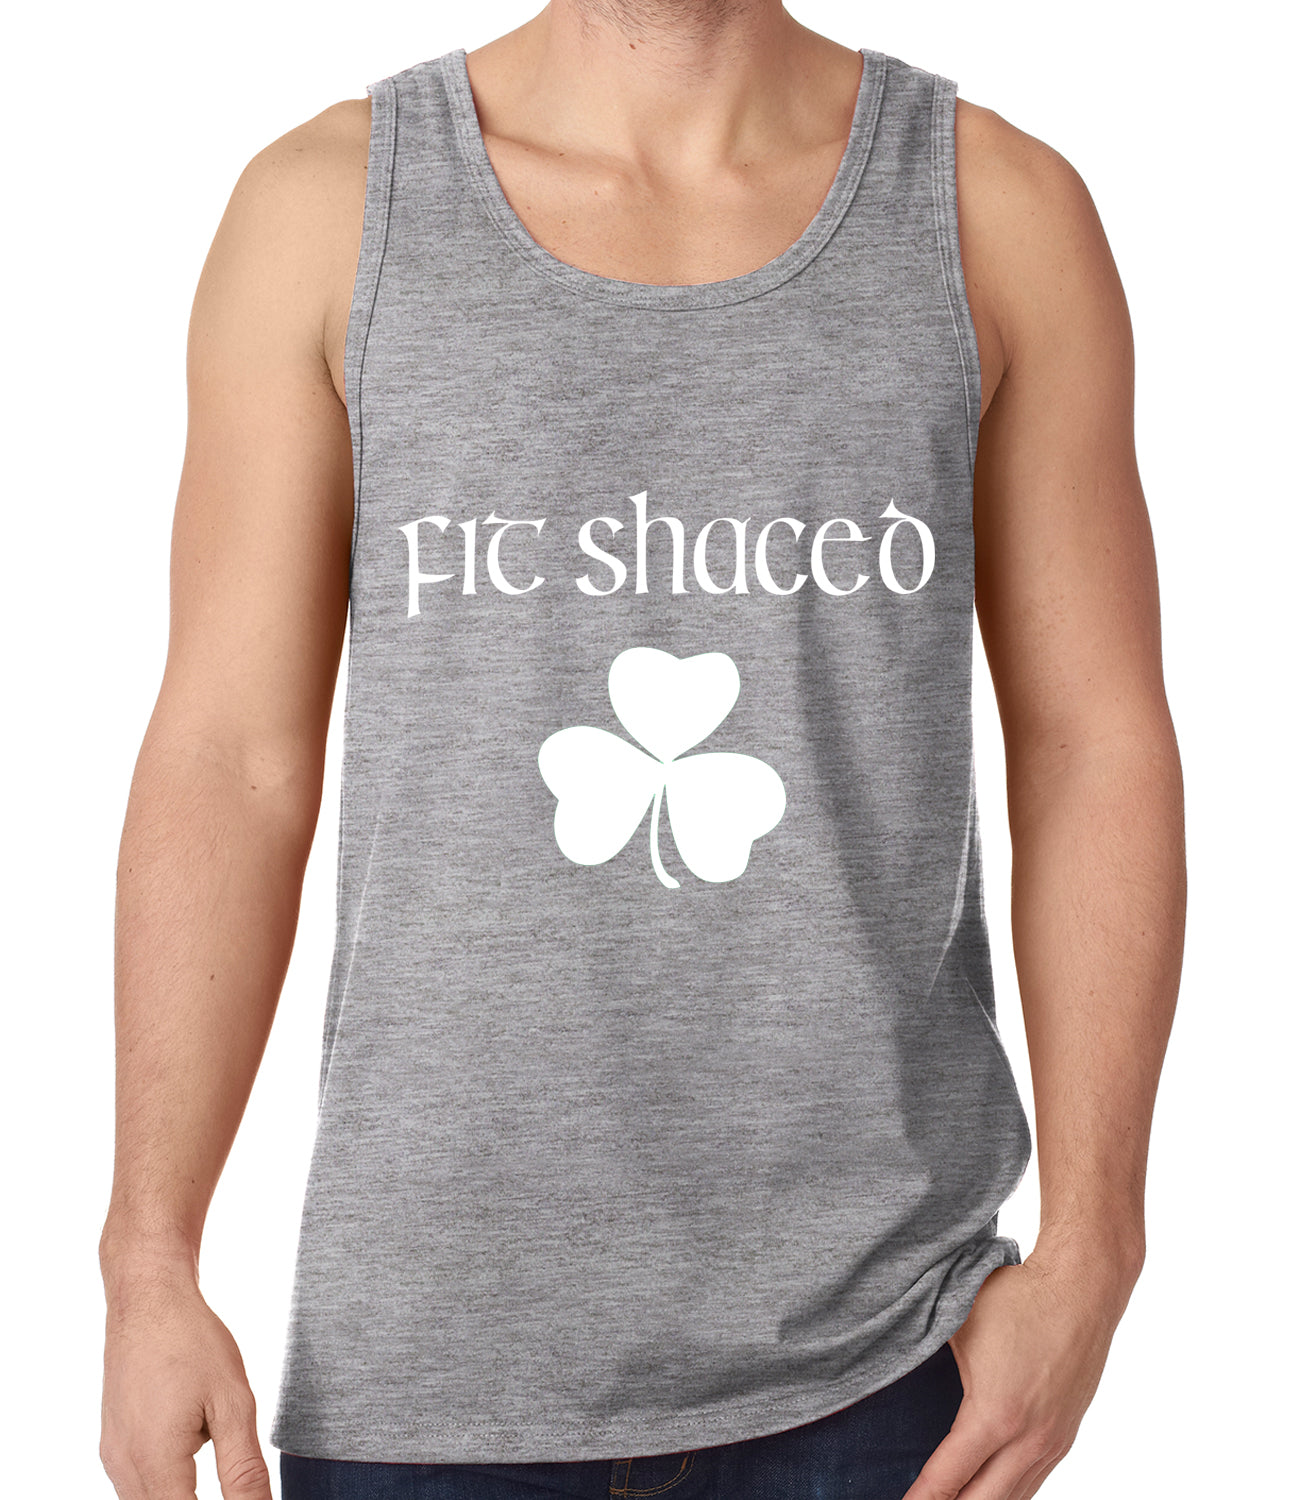 Fit Shaced (Shit Faced) St. Patricks Day Shamrock Drinking Tank Top